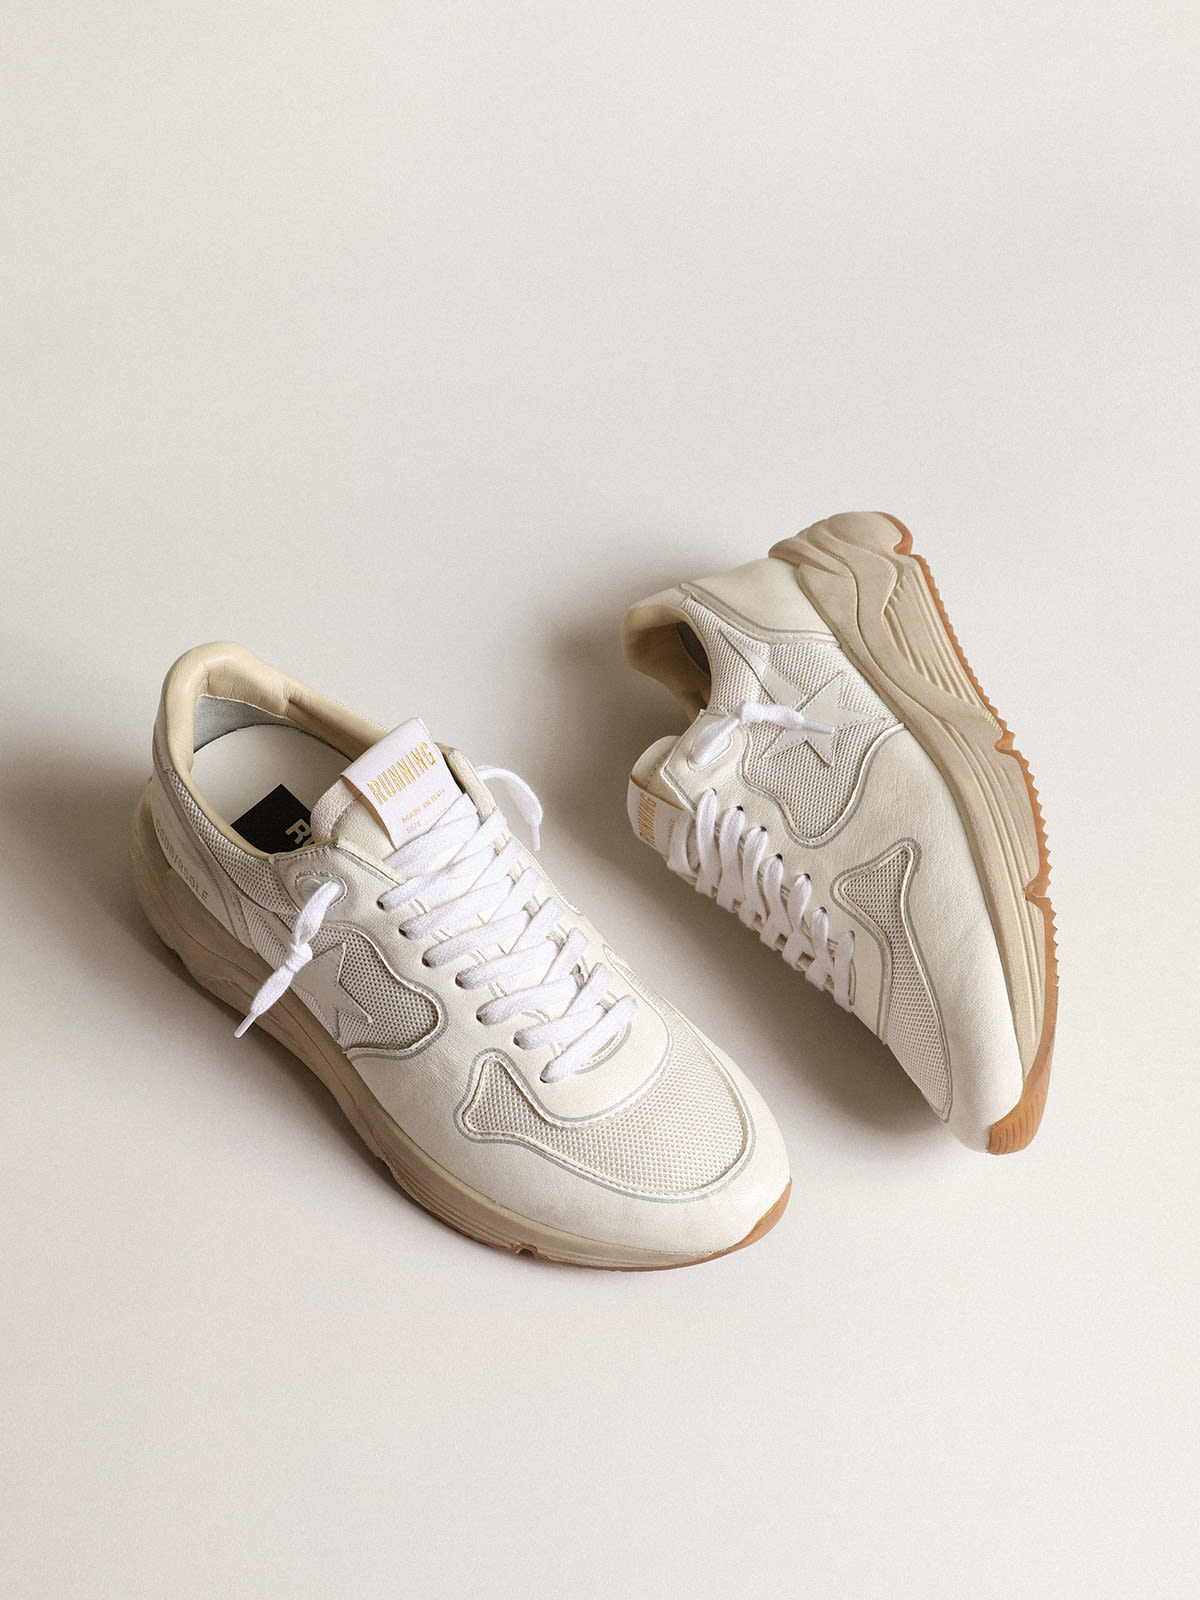 Golden Goose - Men’s Running sole sneakers in optical-white mesh and nappa leather with white leather star in 